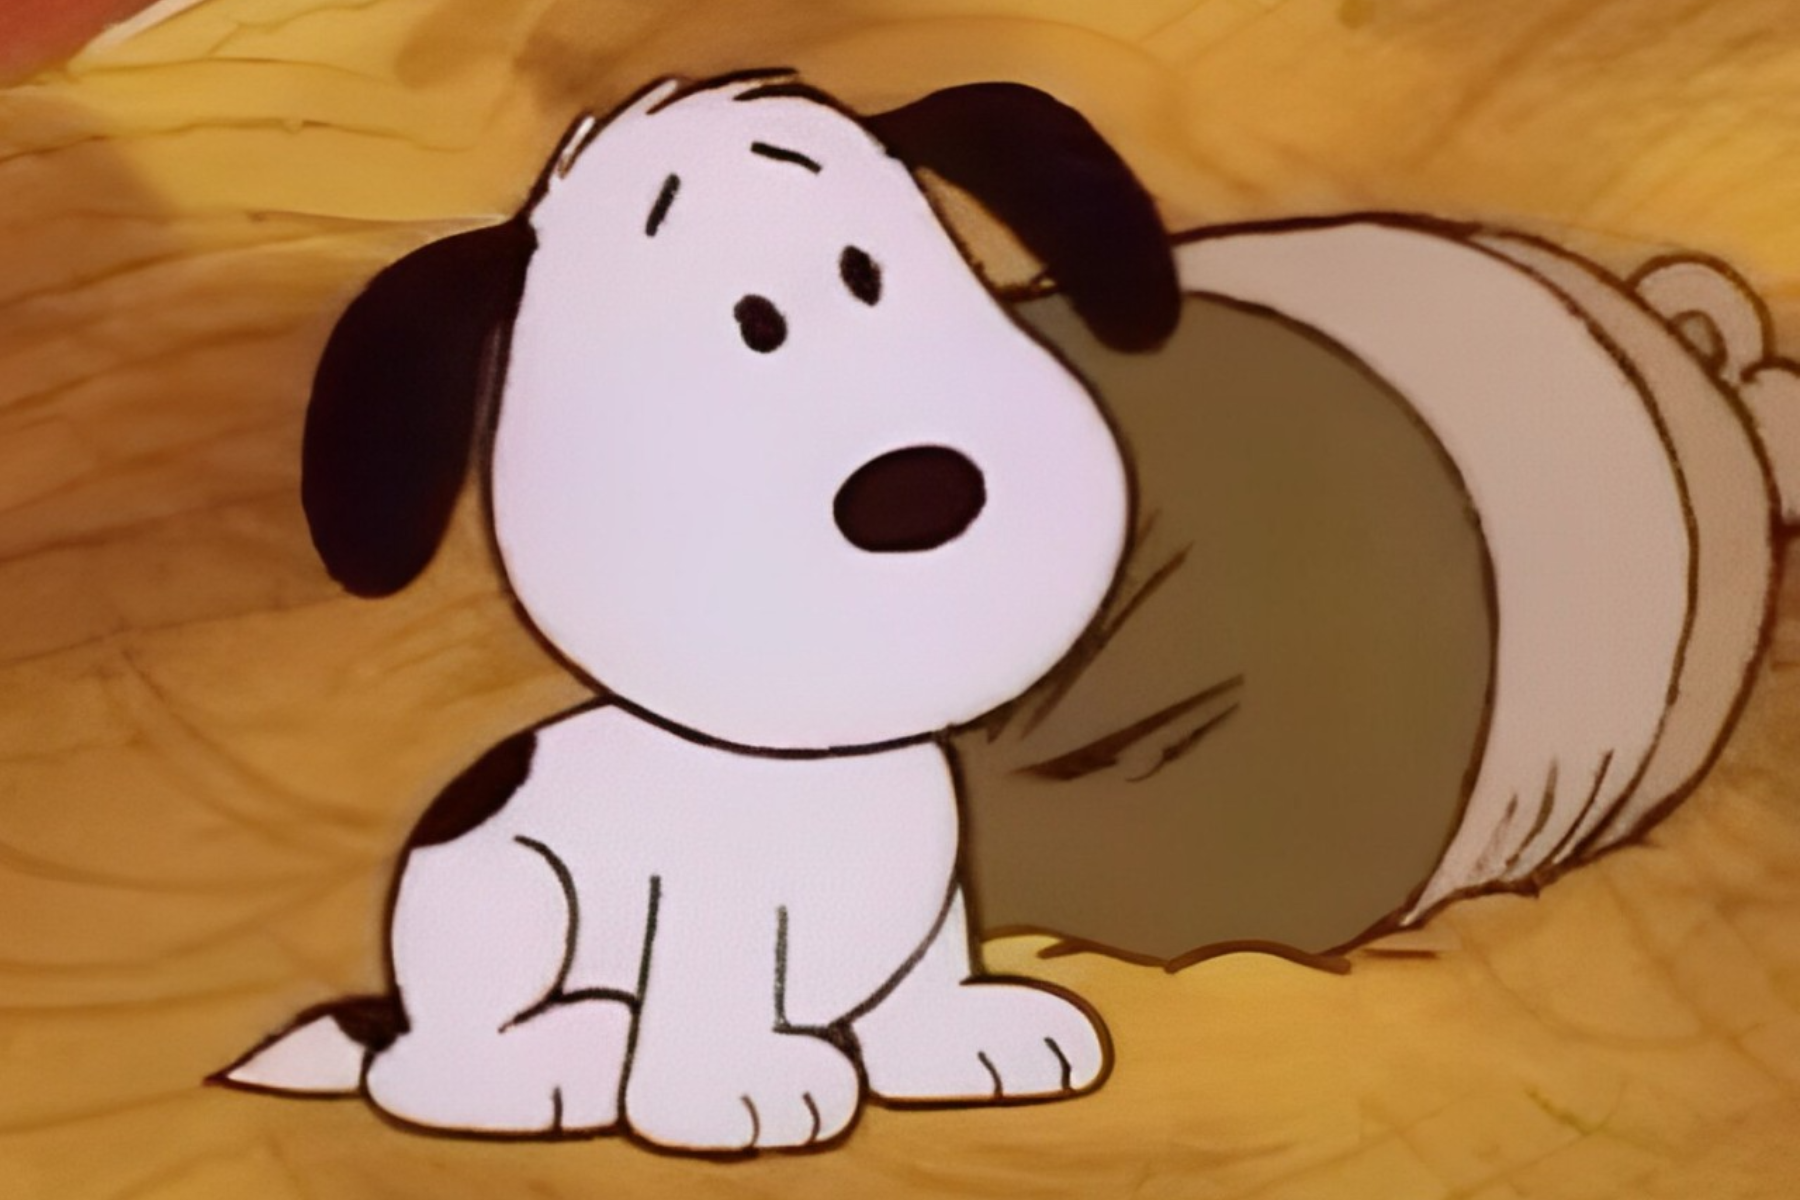 Snoopy is sitting on the ground